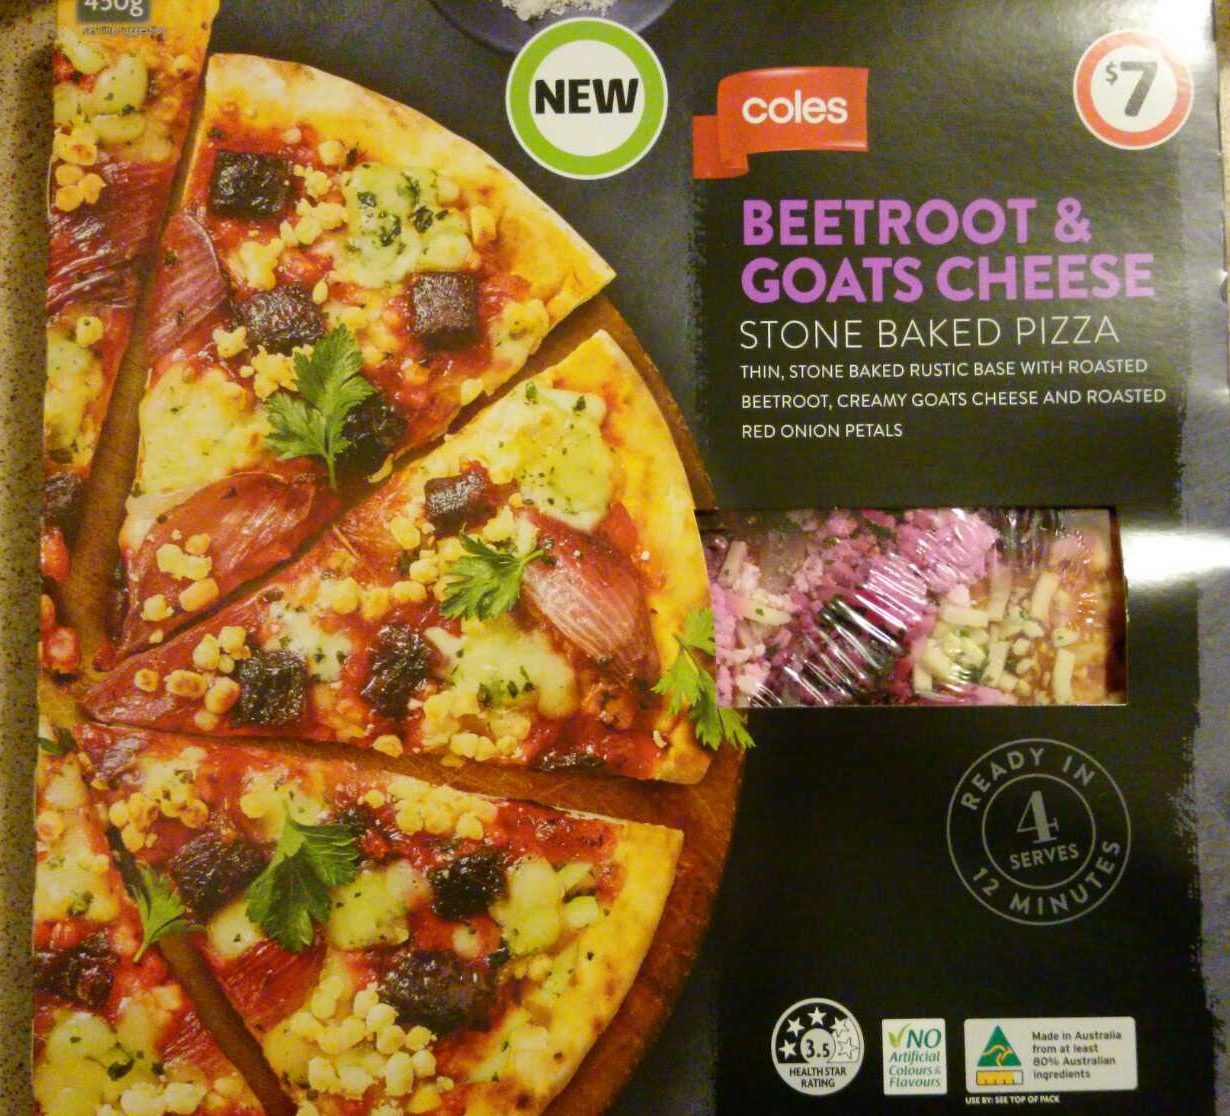 Coles Beetroot & Goats Cheese Stone Baked Pizza - Product